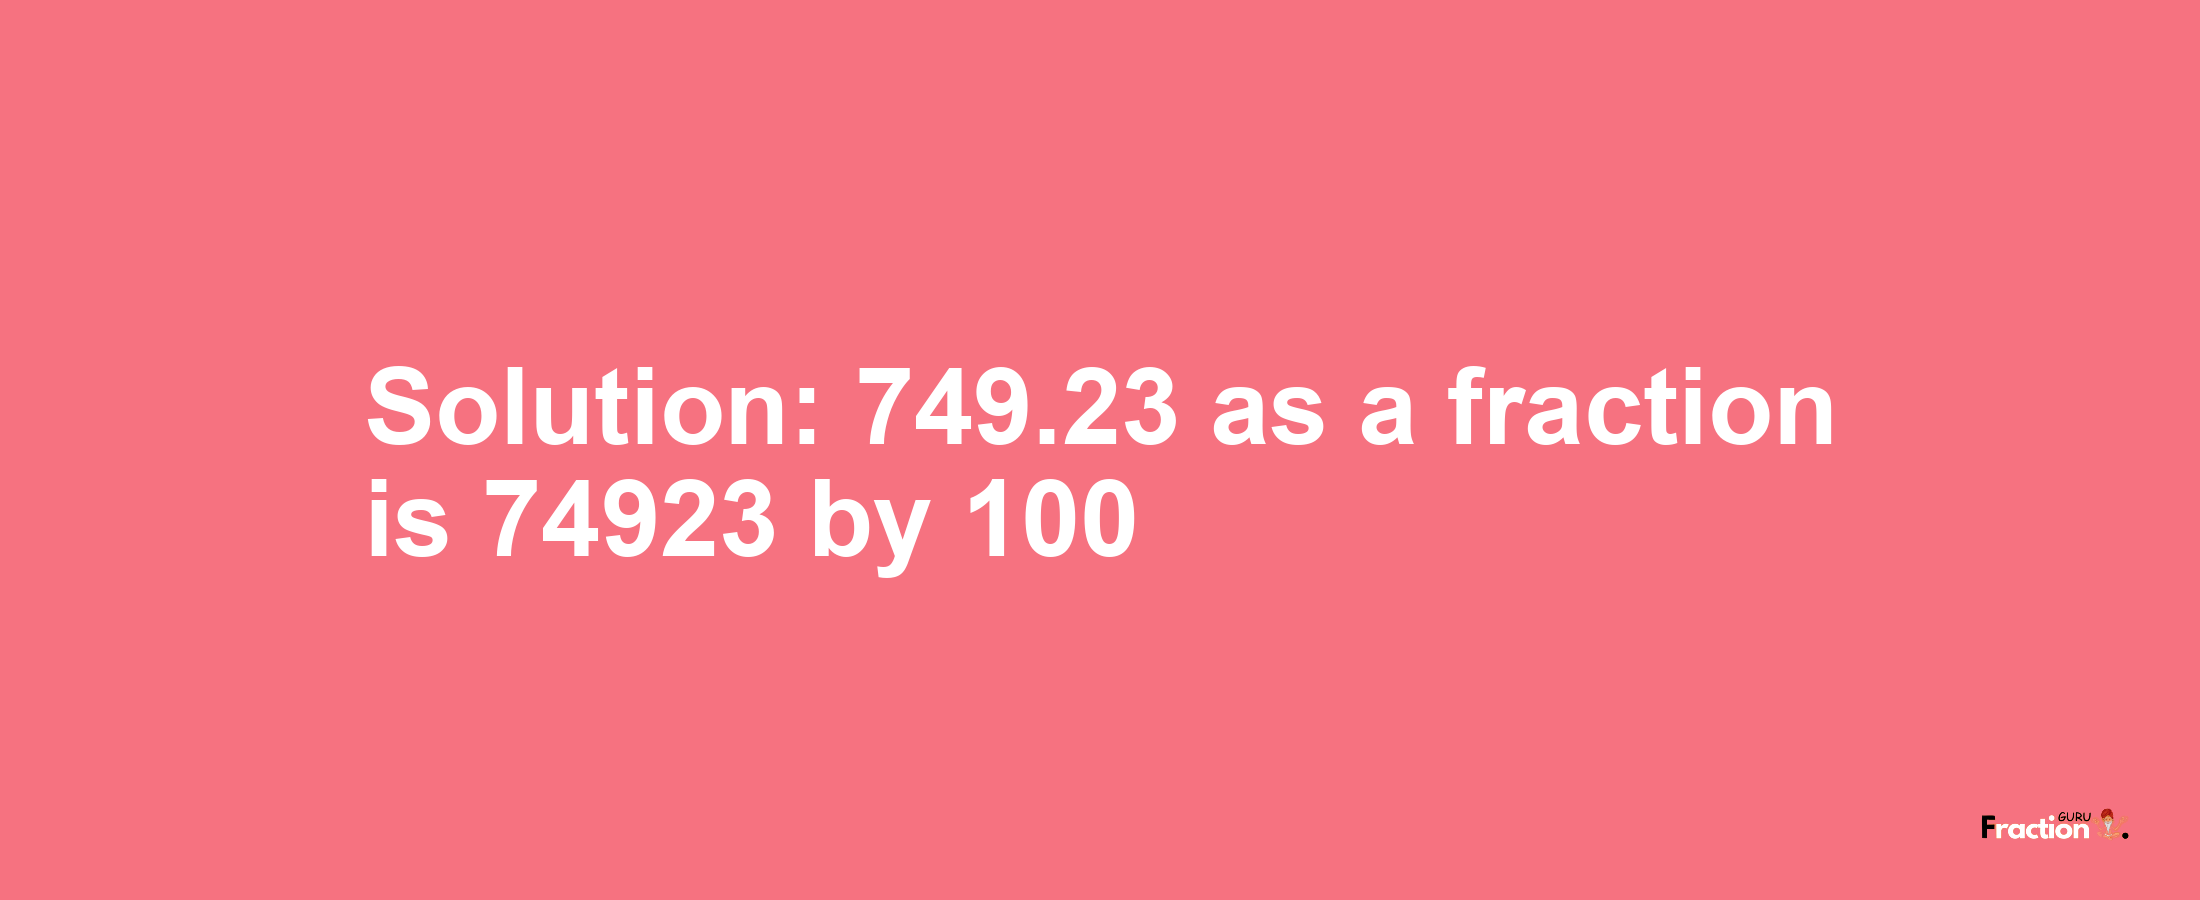 Solution:749.23 as a fraction is 74923/100